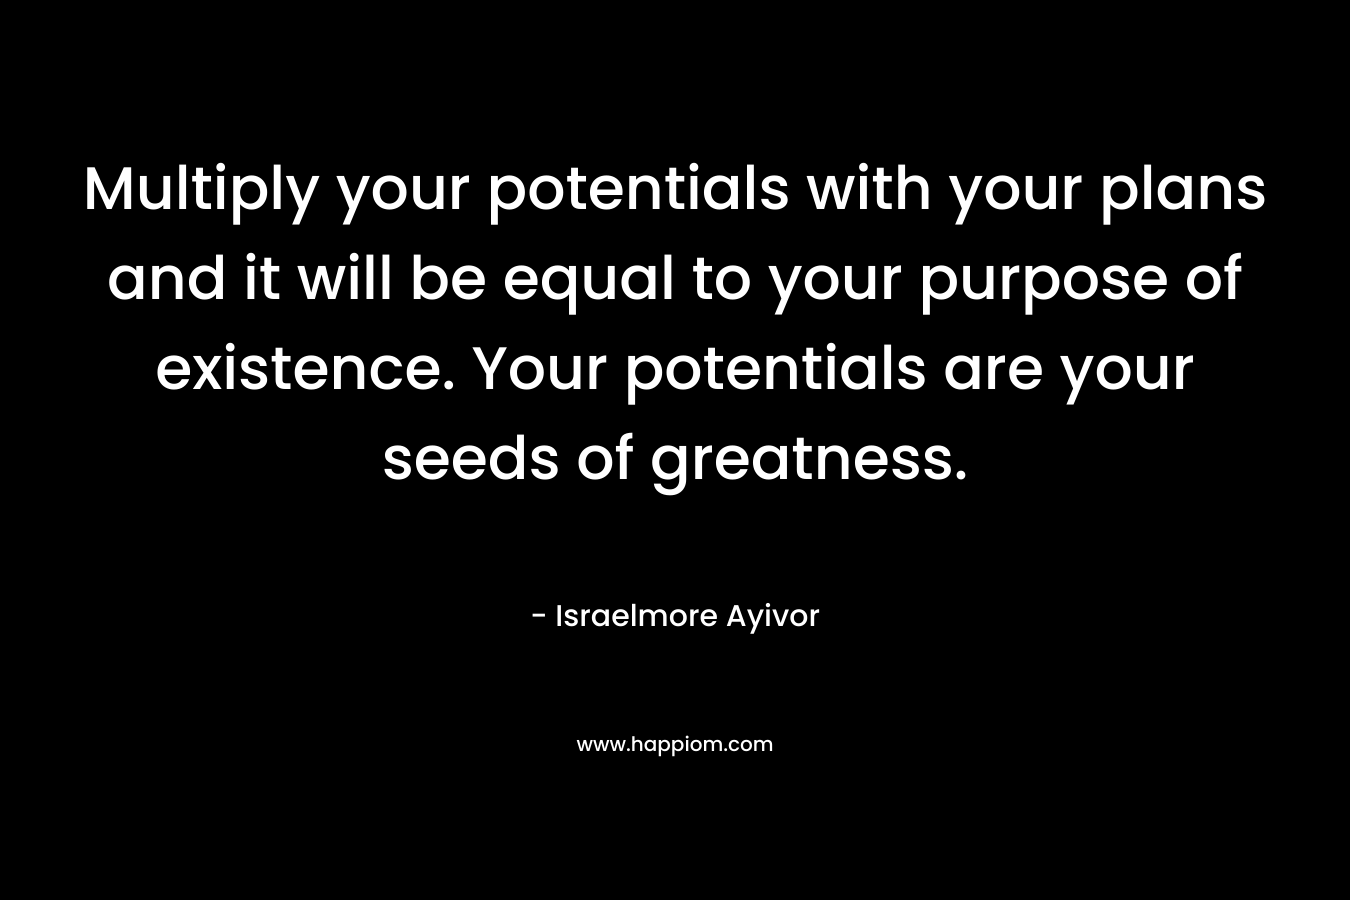 Multiply your potentials with your plans and it will be equal to your purpose of existence. Your potentials are your seeds of greatness.